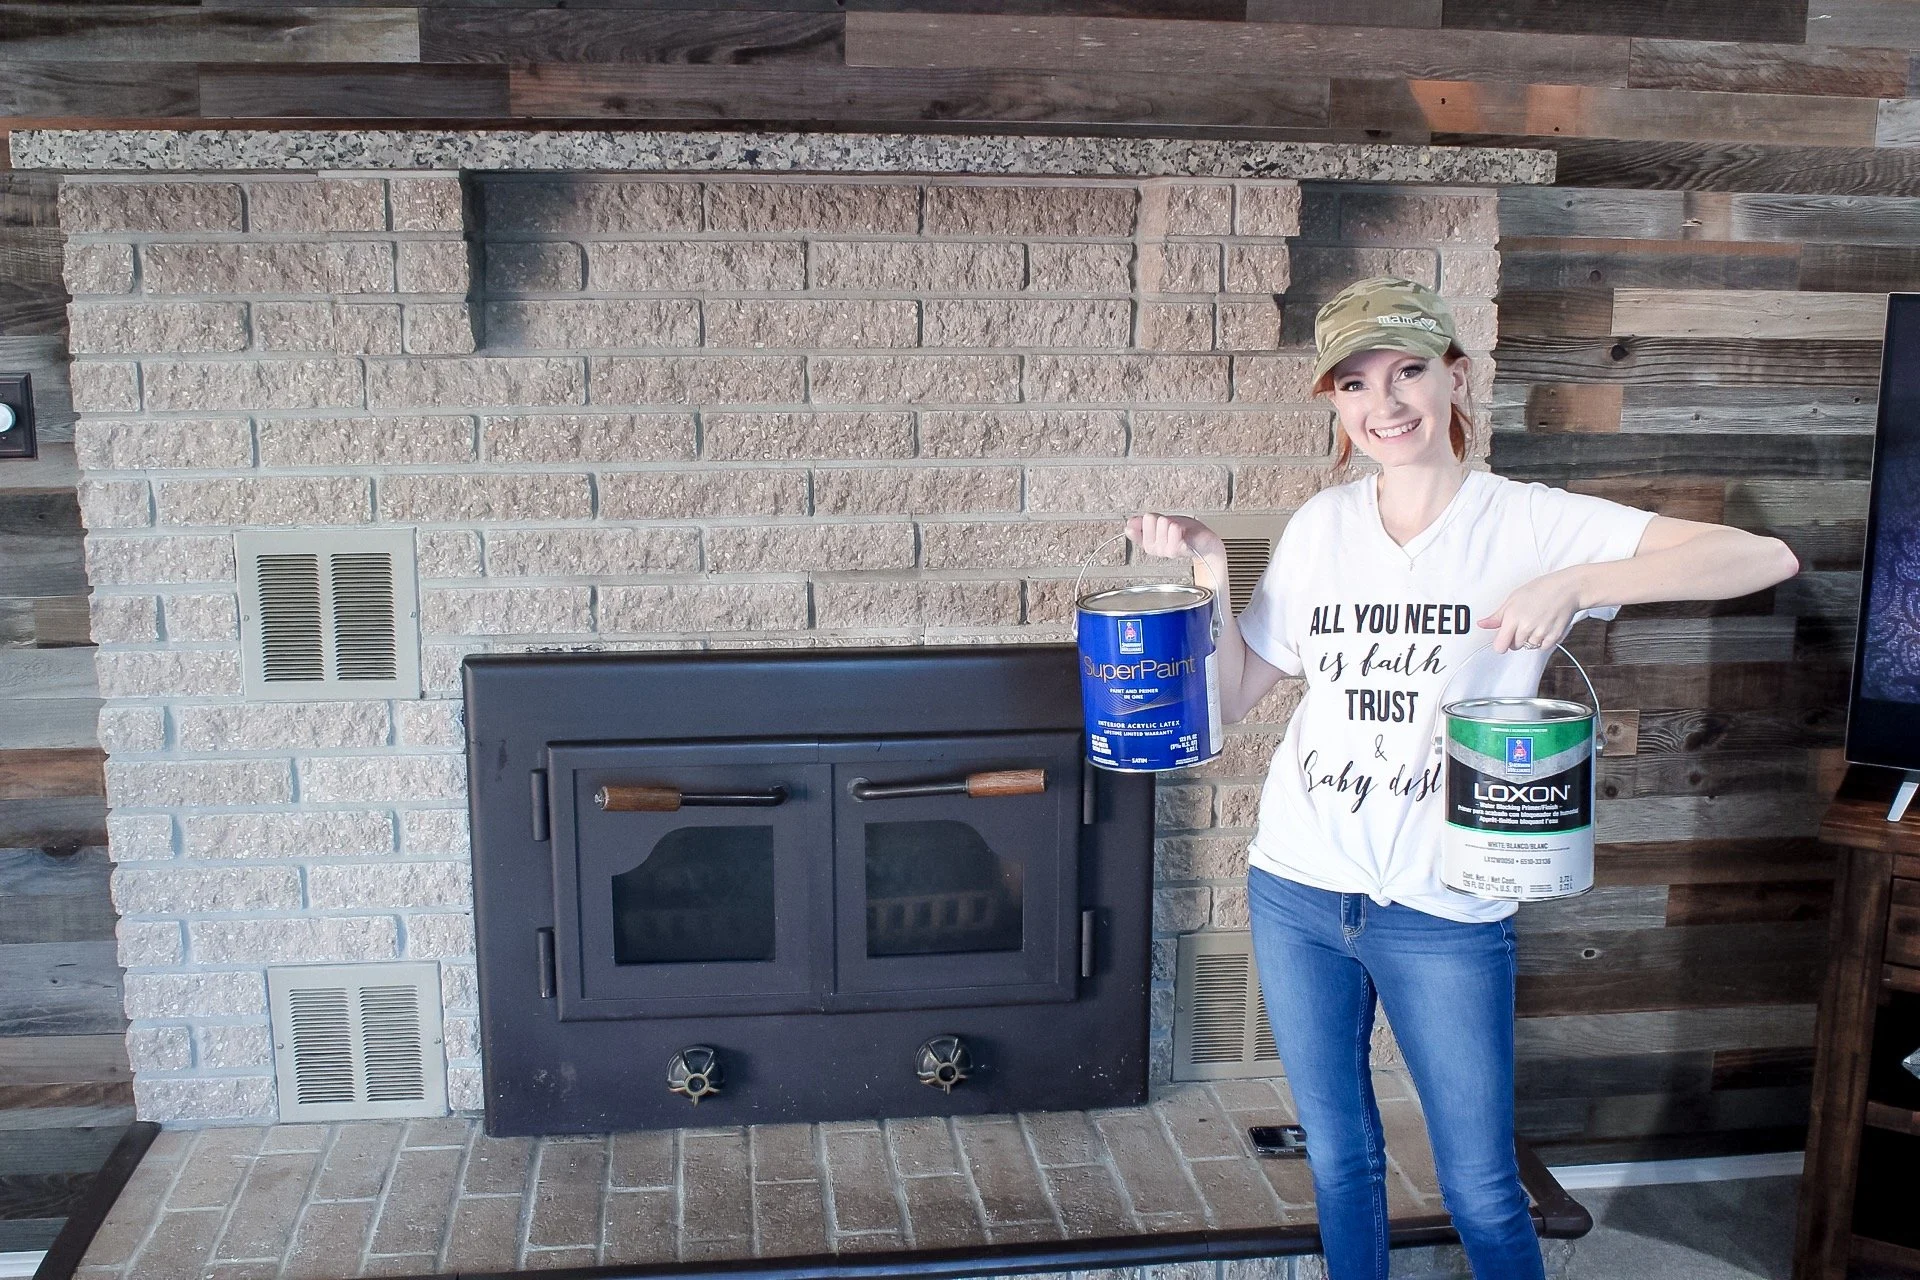 Corinne of Slayathomemother.com holding up paint cans in front of my tan fireplace, ready to paint!